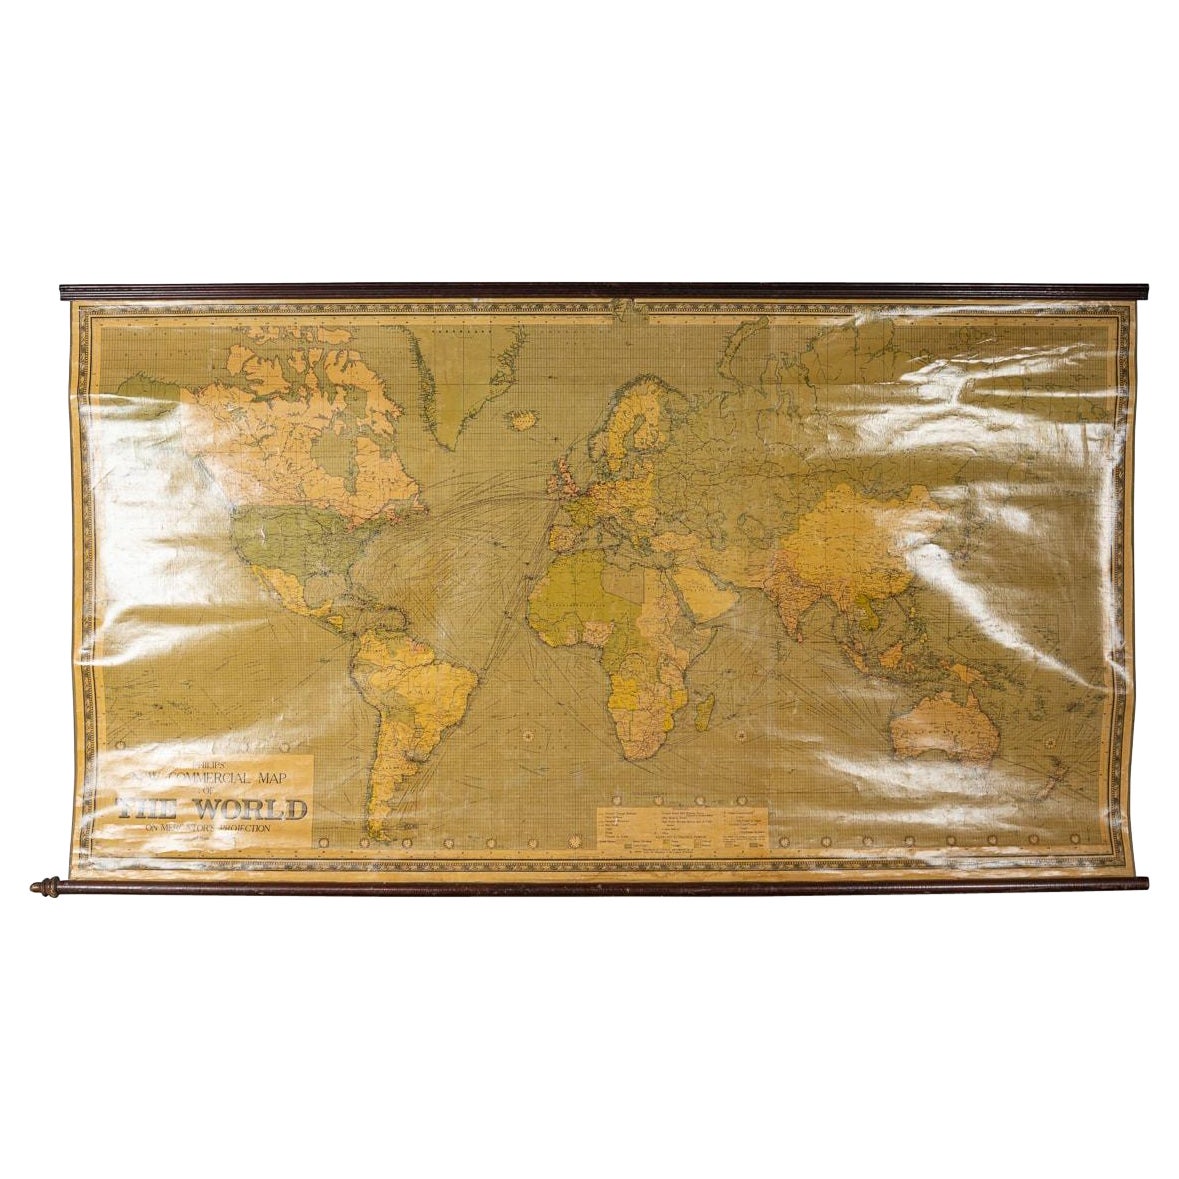 Antique 20th Century Large Scrolled Map Of The World, George Philips c.1918